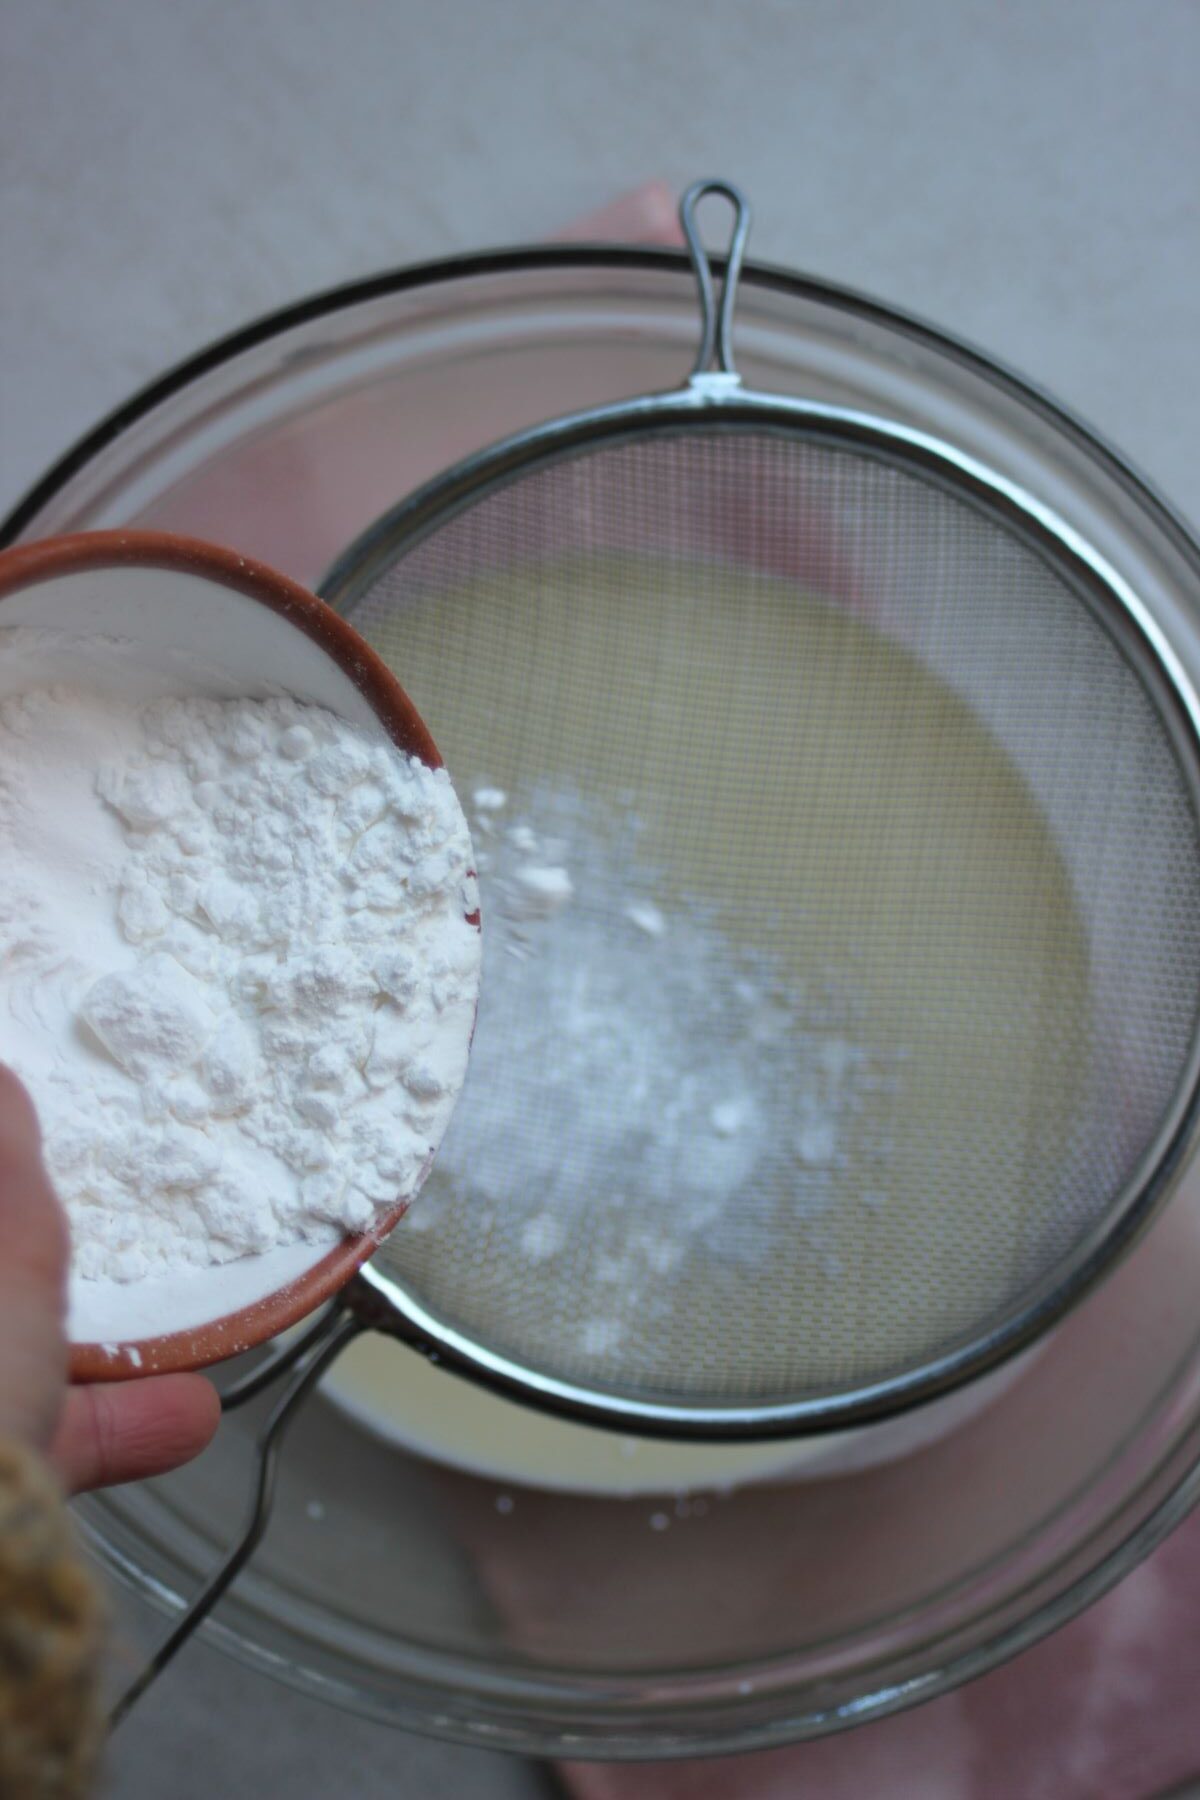 A plate with corn starch is being sieve into a glass bowl.